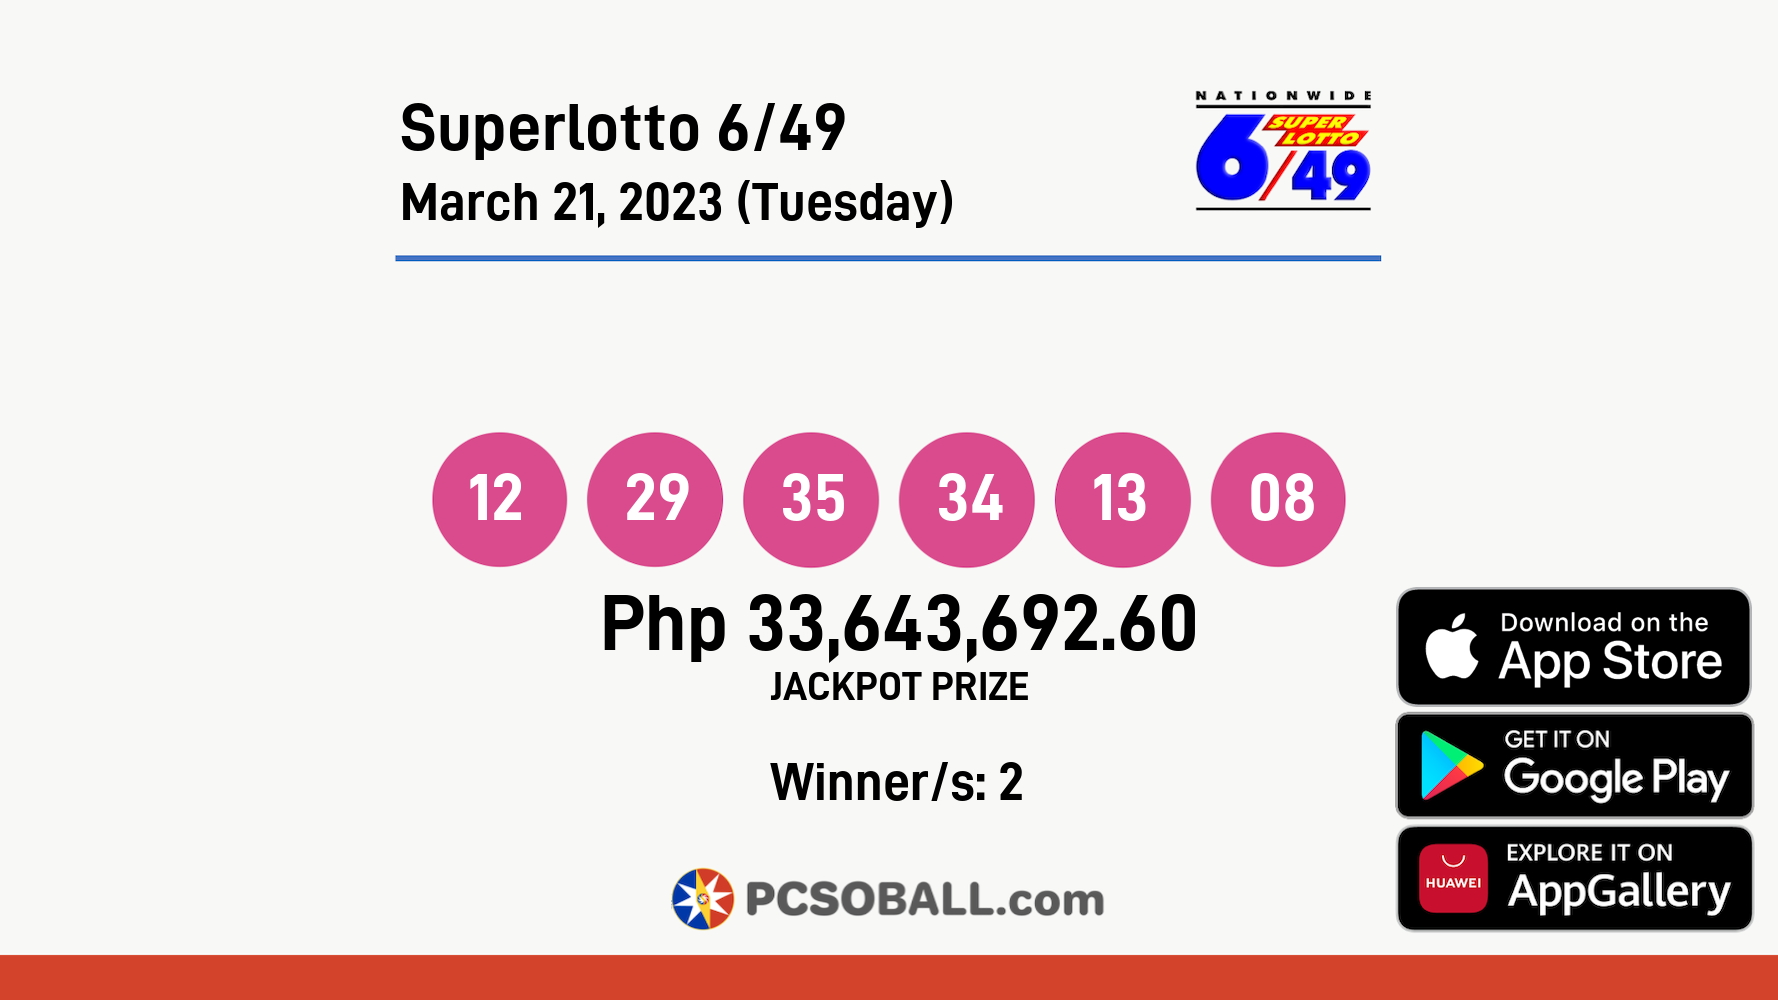 Superlotto 6/49 March 21, 2023 (Tuesday) Result